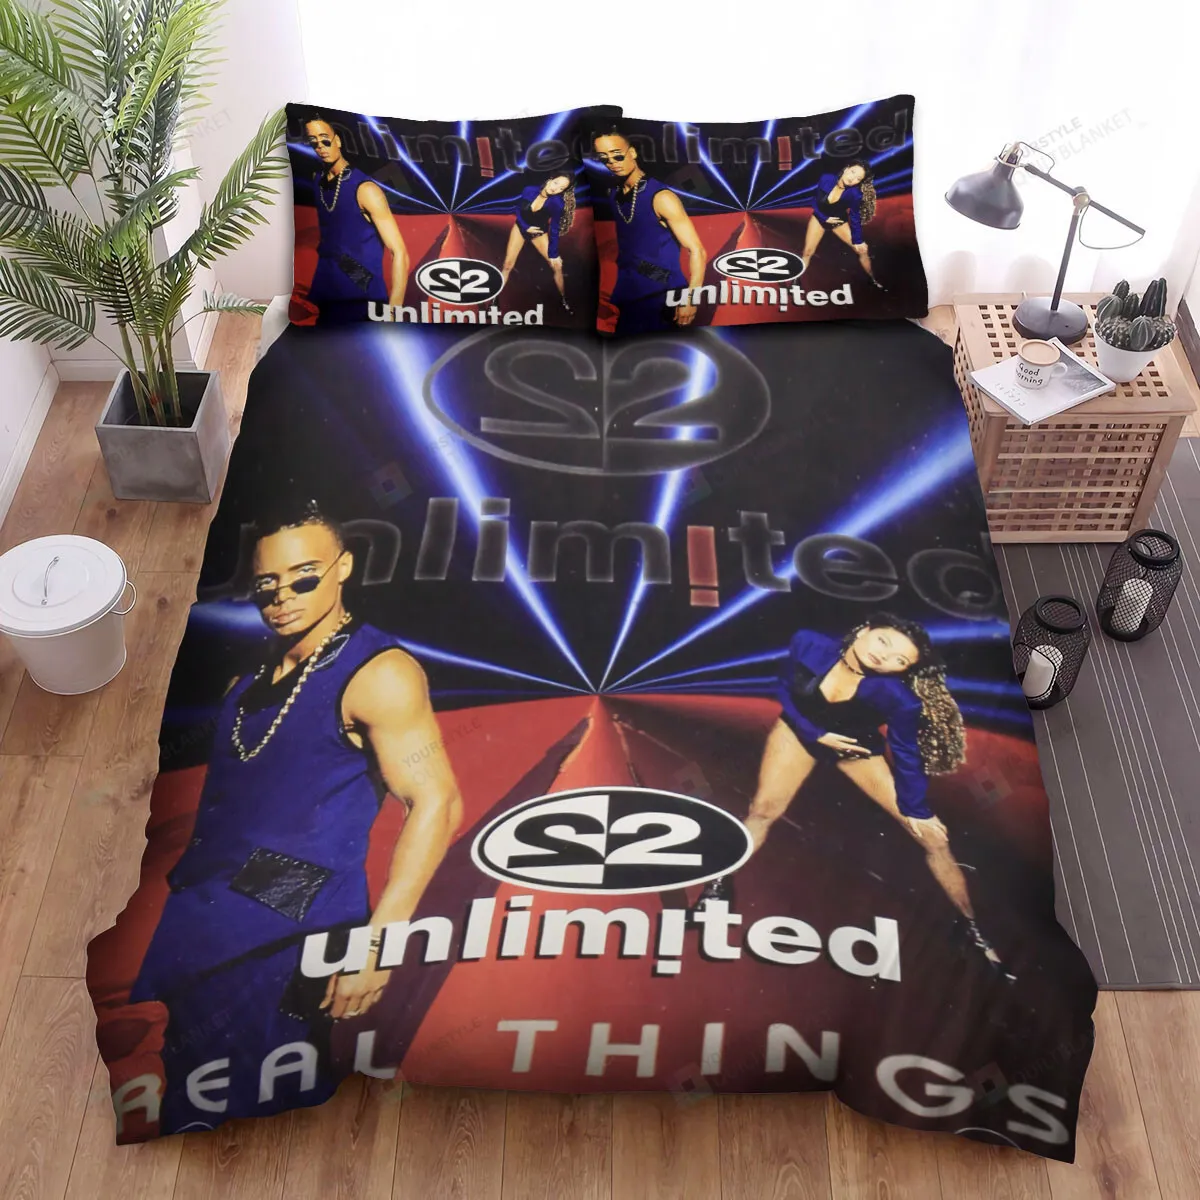 2 Unlimited Real Things Bed Sheets Spread Comforter Duvet Cover Bedding Sets